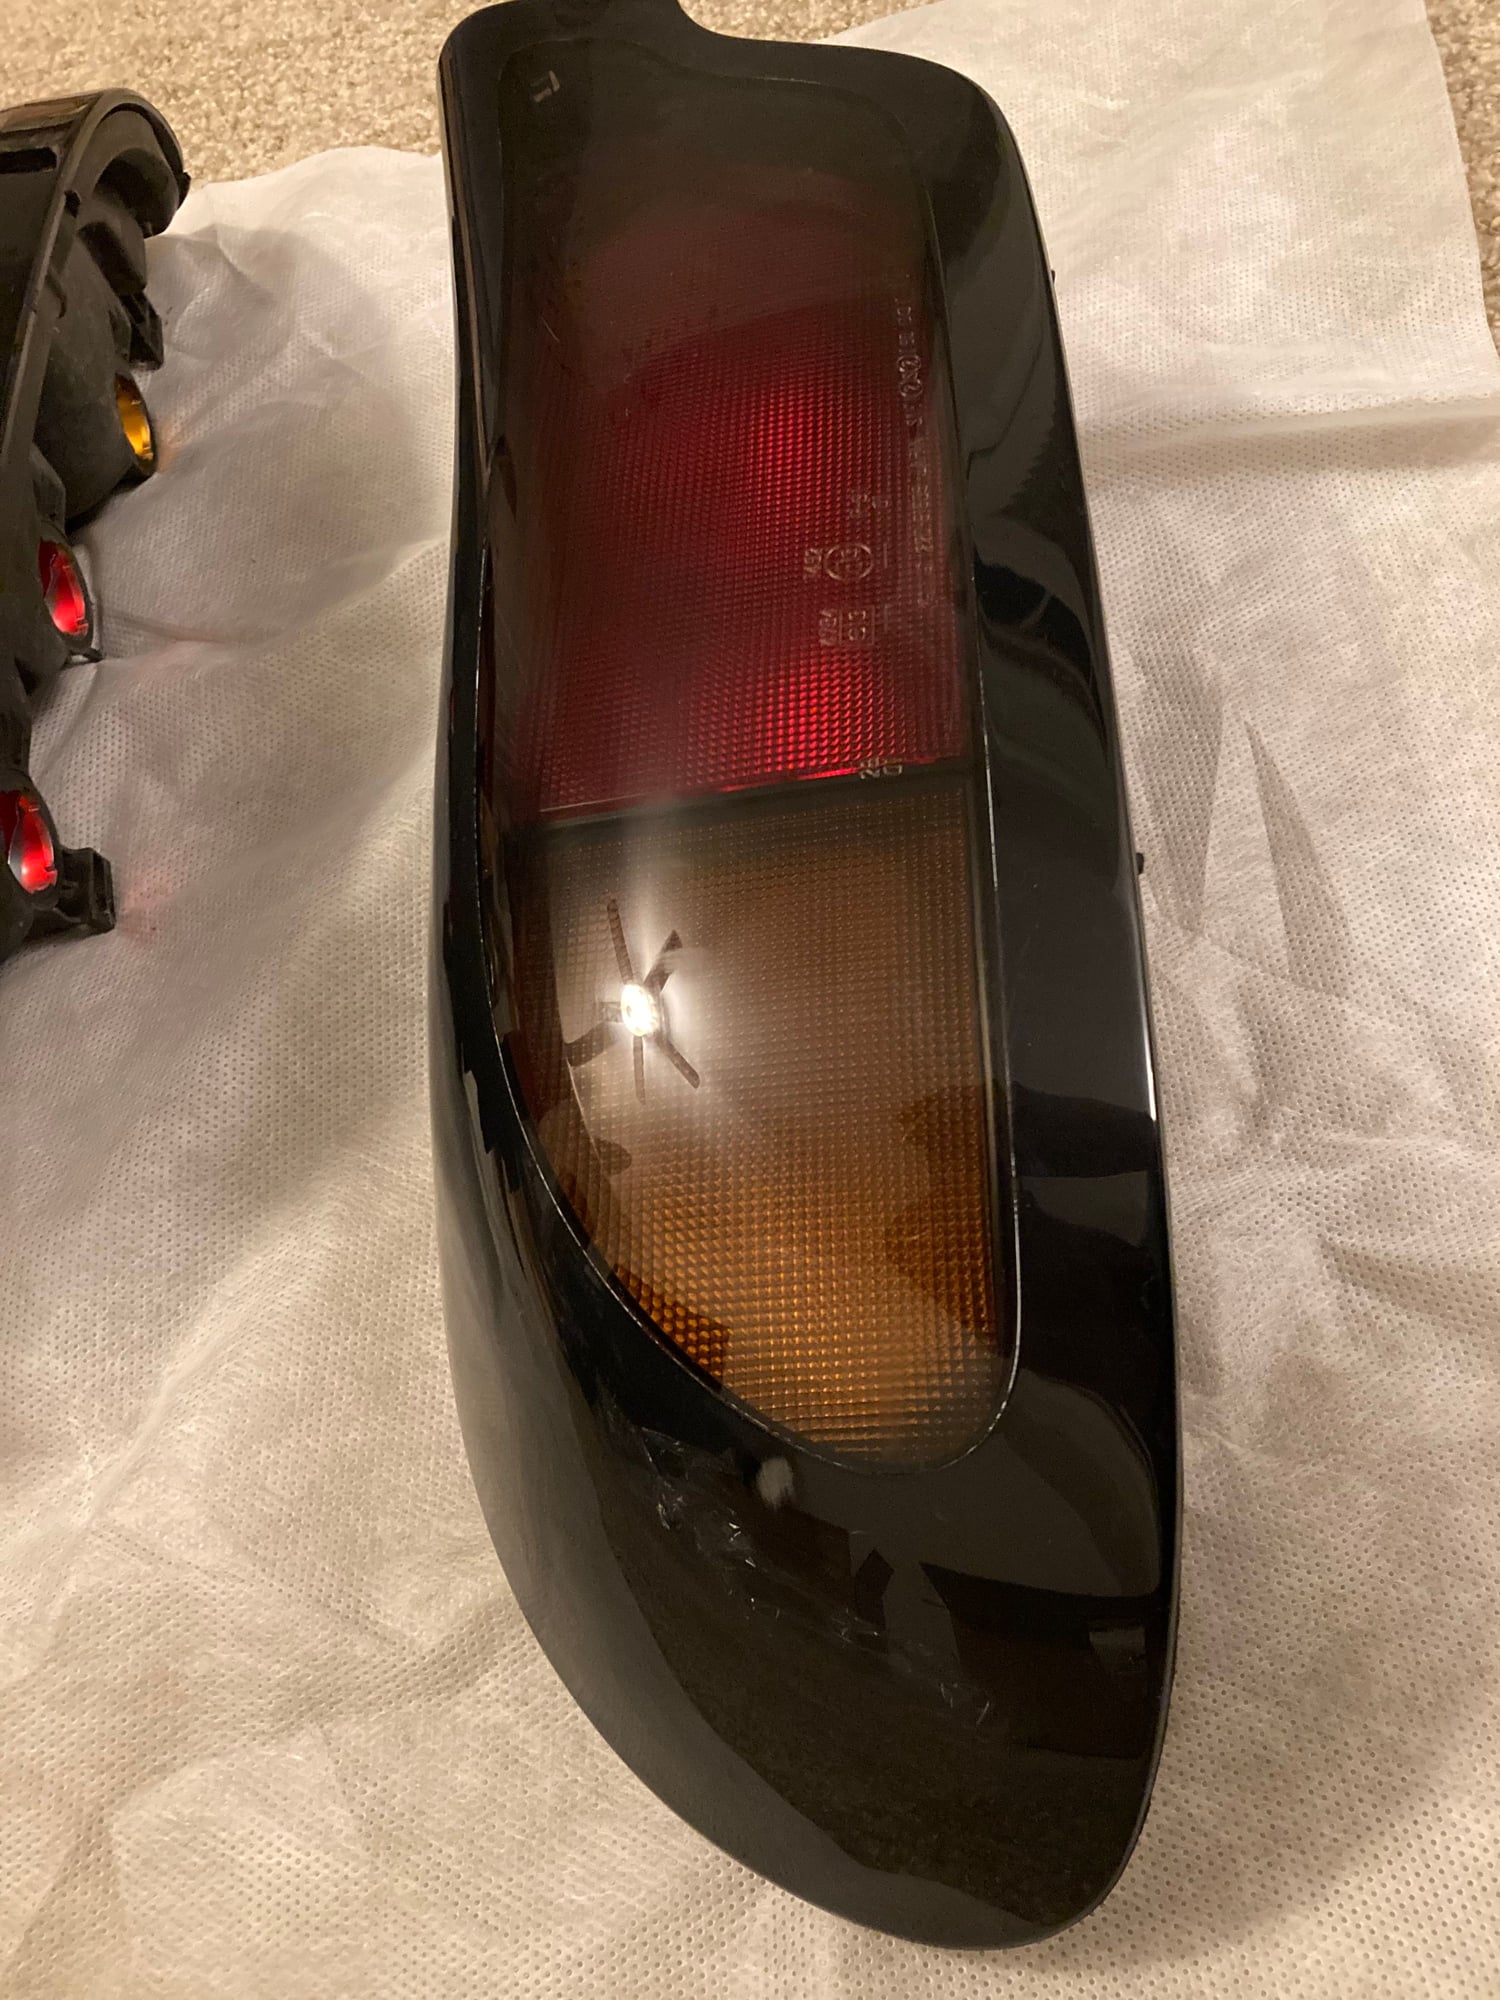 Lights - OEM USDM Taillight Housings - Used - 1993 to 2002 Mazda RX-7 - Indianapolis, IN 46278, United States